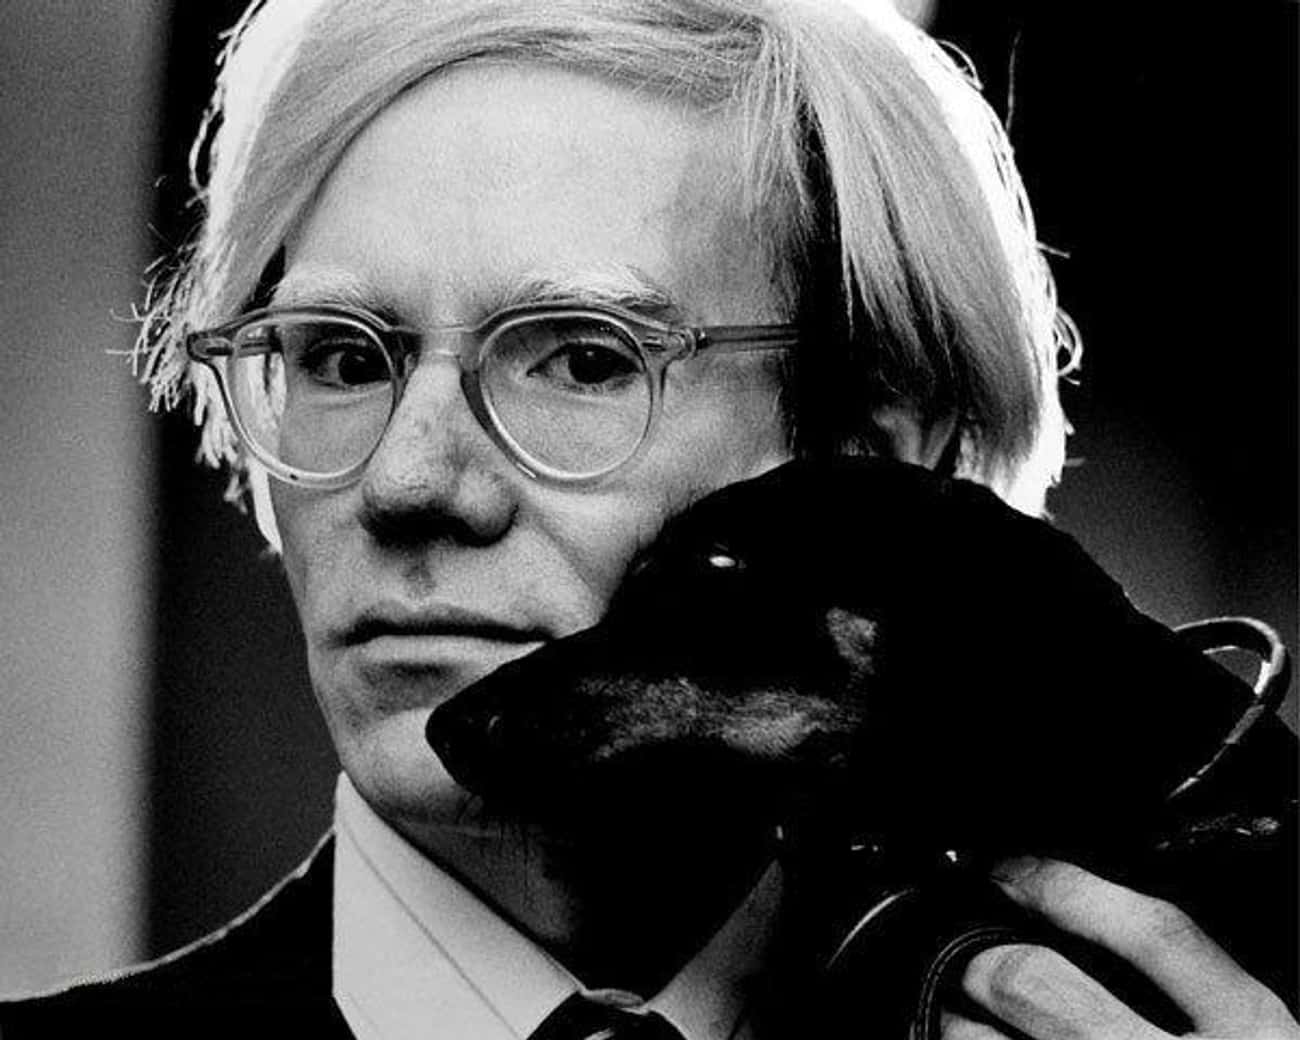 Warhol Wore Wigs Because He Was Self-Conscious Of His Early Balding 